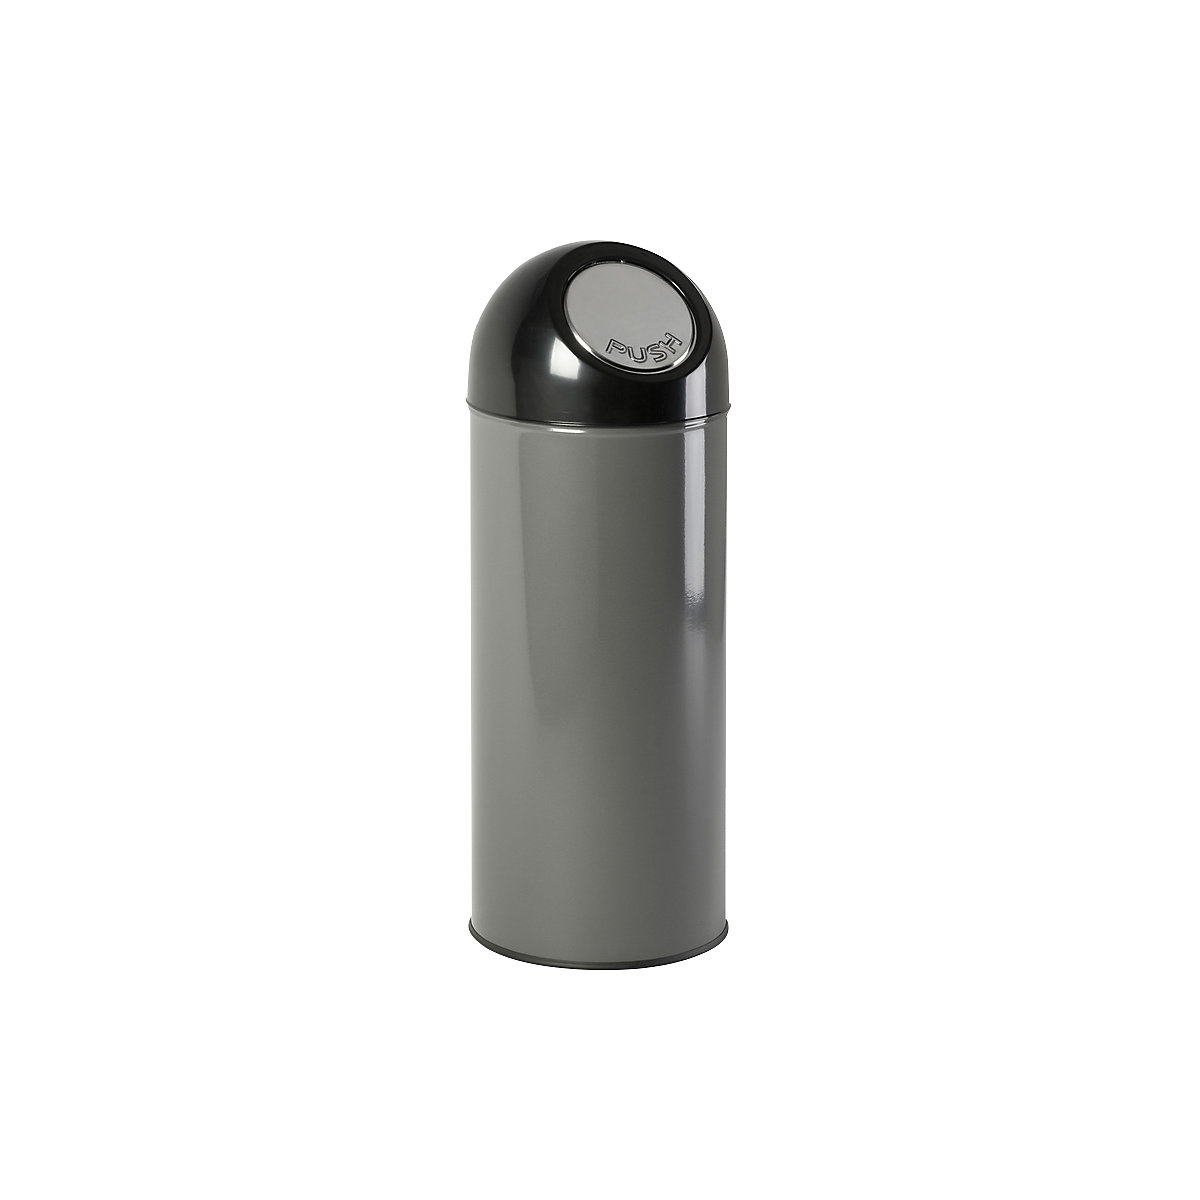 Push rubbish bin, capacity 55 l, zinc plated inner container, grey, 2+ items-8